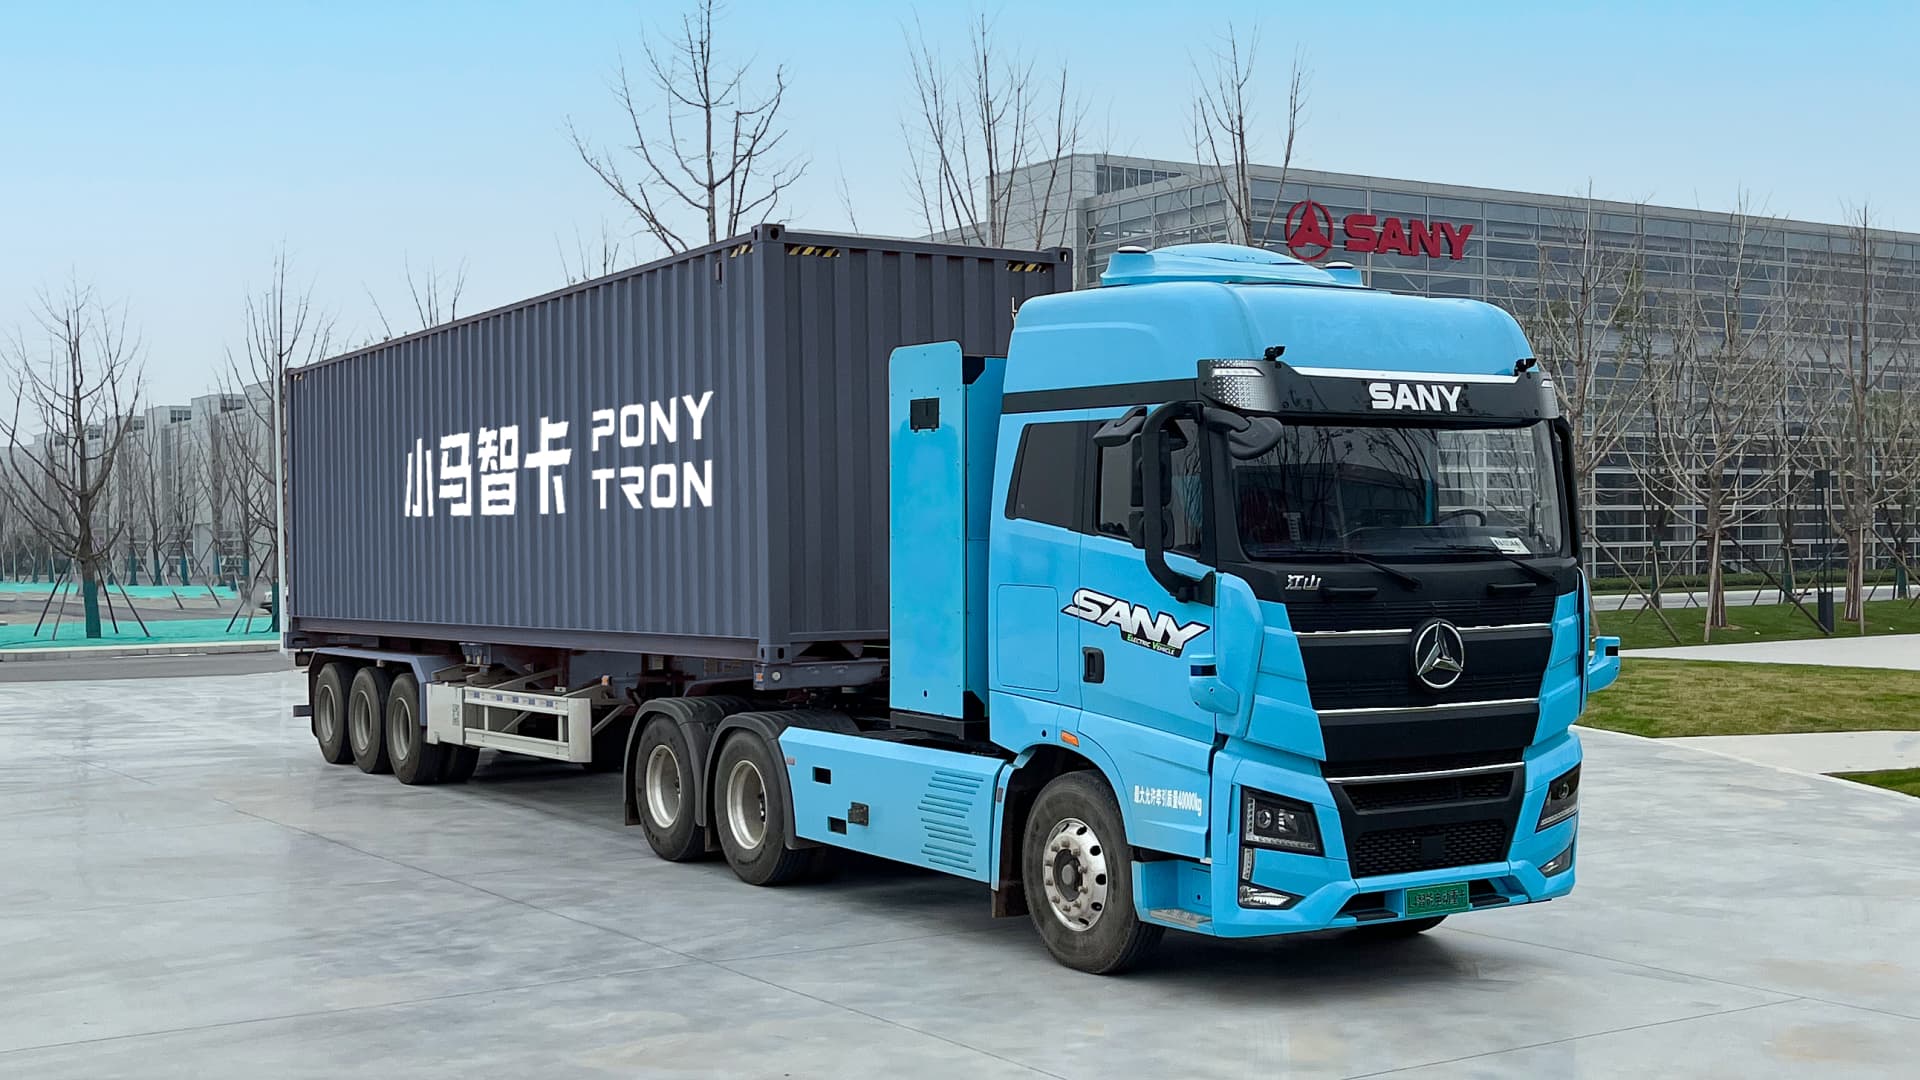 Self-driving start-up Pony.ai plans to mass produce robotrucks in China